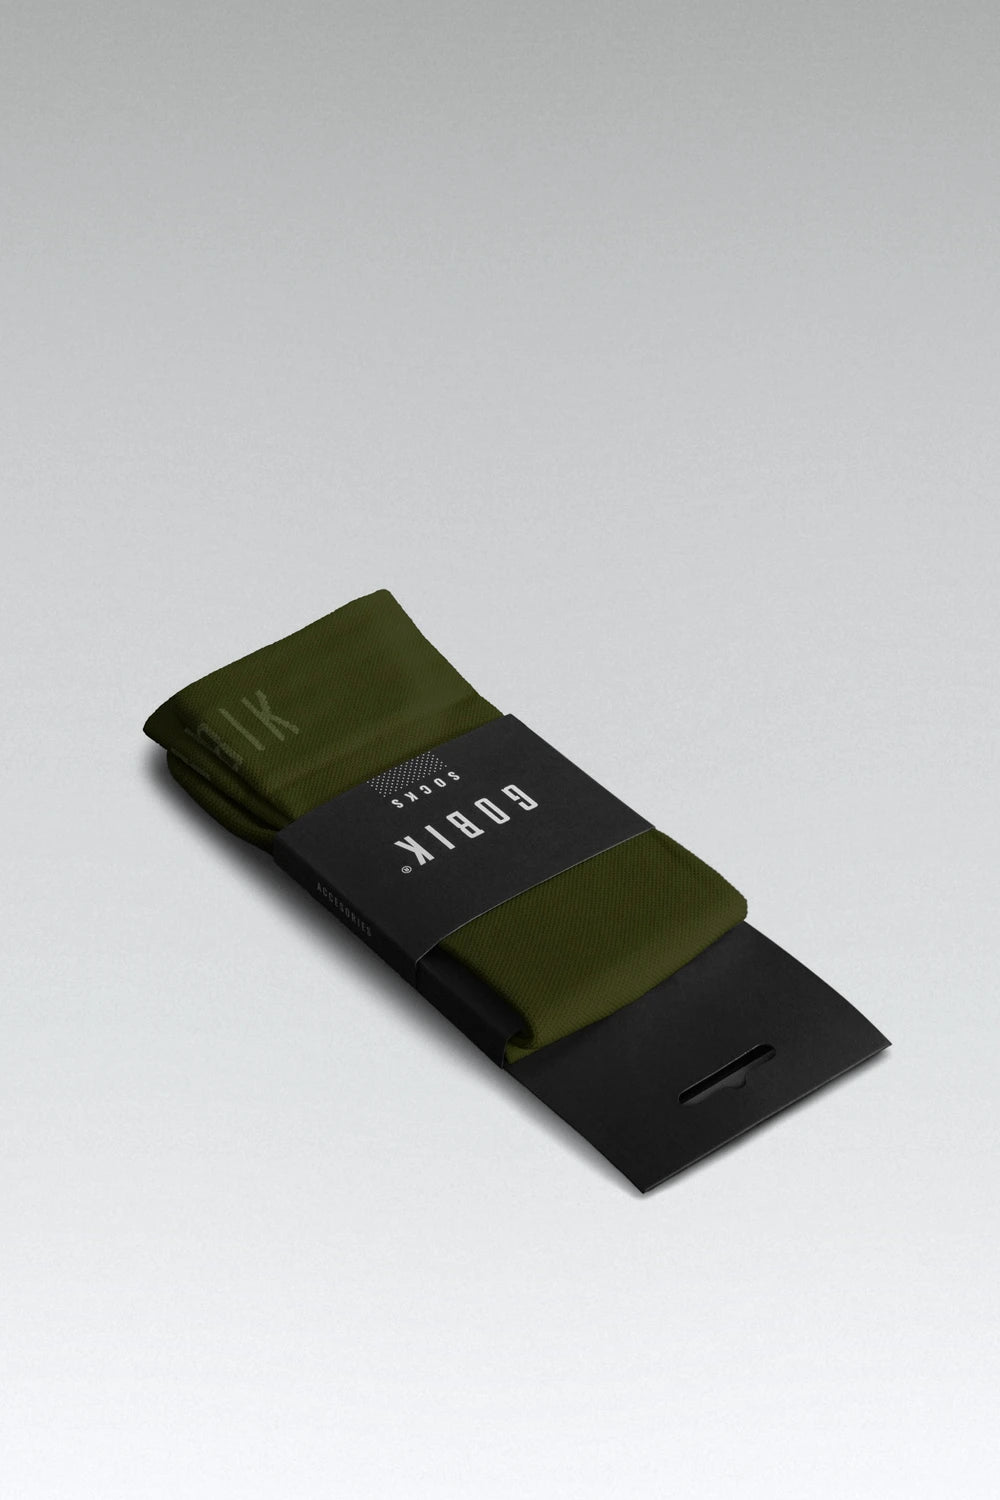 CHAUSSETTES PURE UNISEX ARMY